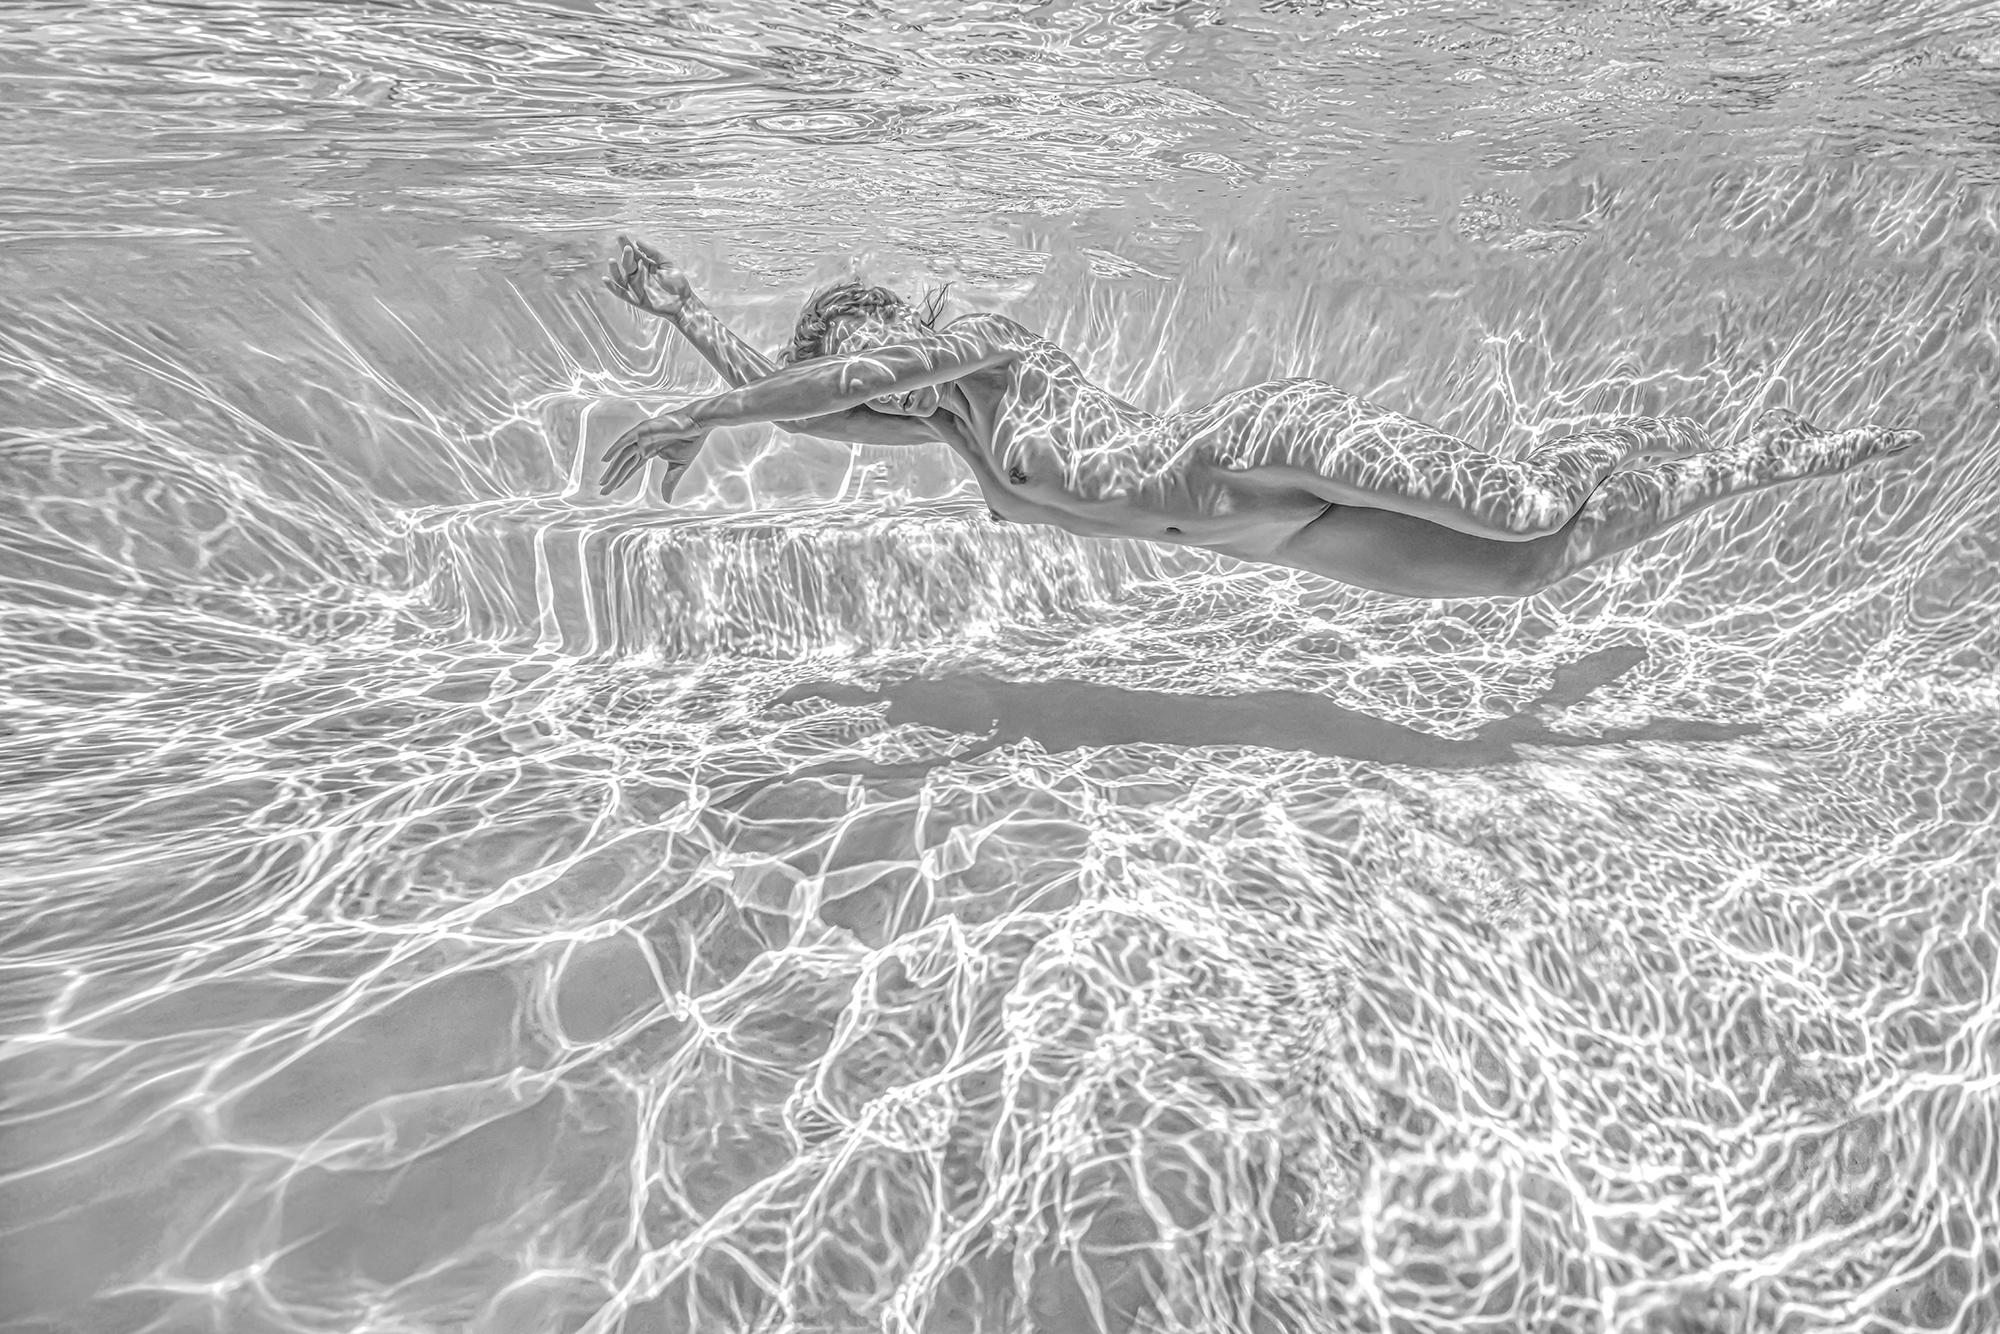 Alex Sher Black and White Photograph - Thunderweb - underwater black & white nude photograph - print on paper 24" x 36"